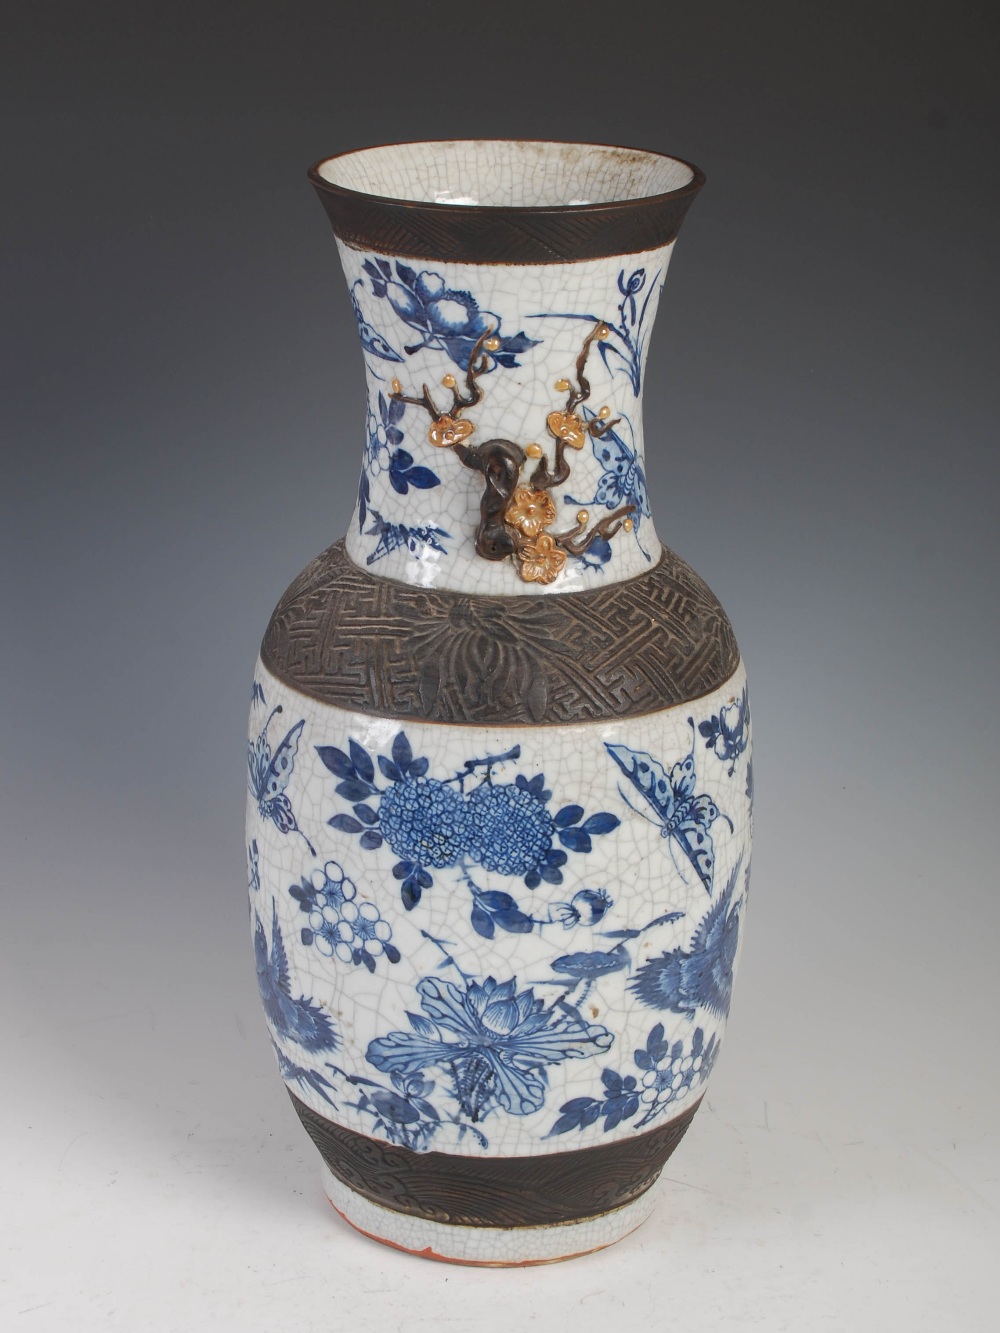 A Chinese porcelain blue and white crackle glazed vase, Qing Dynasty, decorated with foliate sprays, - Image 4 of 10